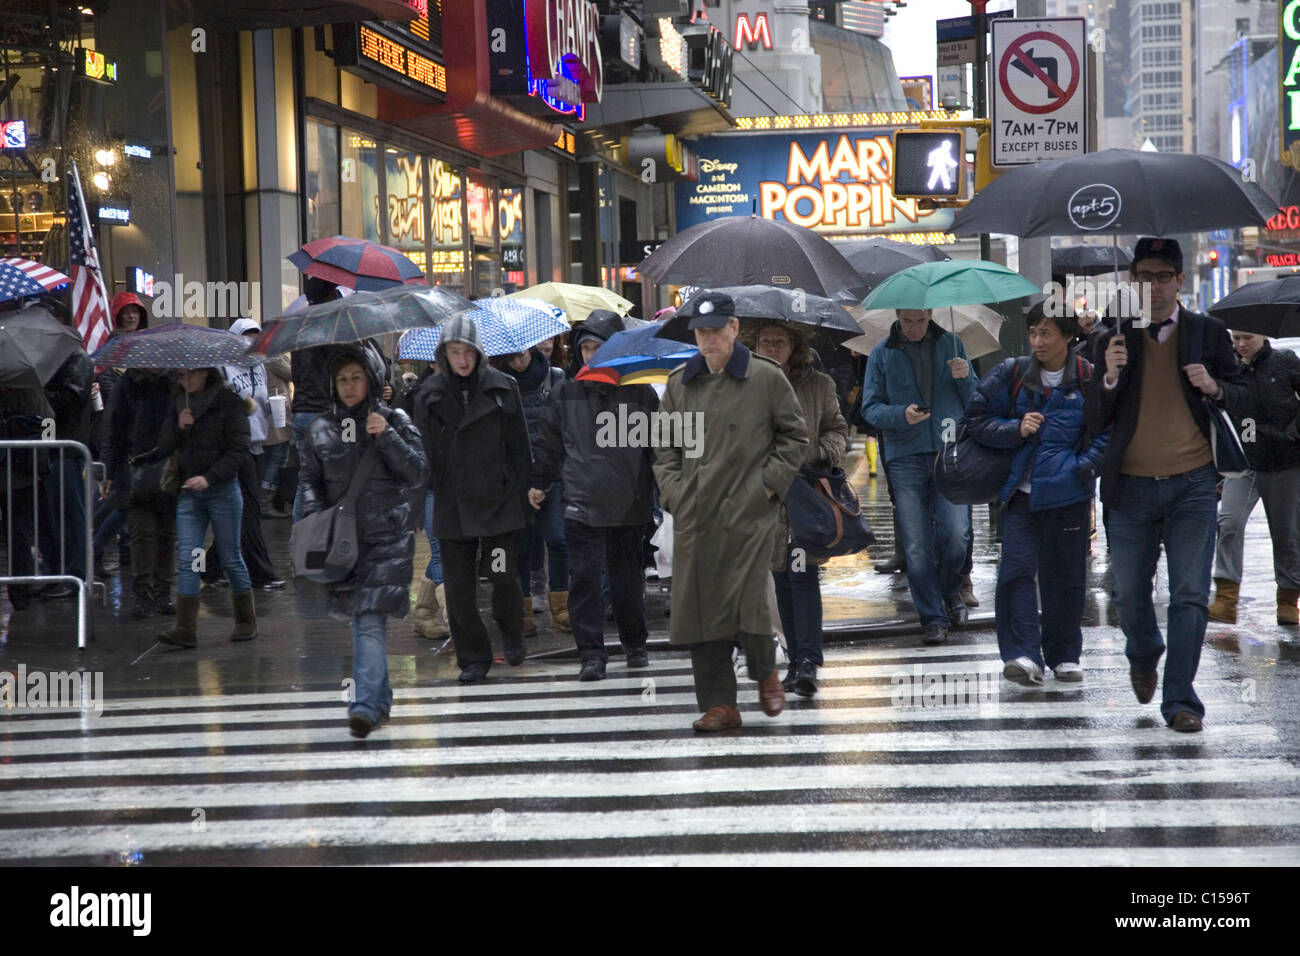 Rainy Day in New York City. 42nd Street & 7th Ave., Times Square. Stockfoto